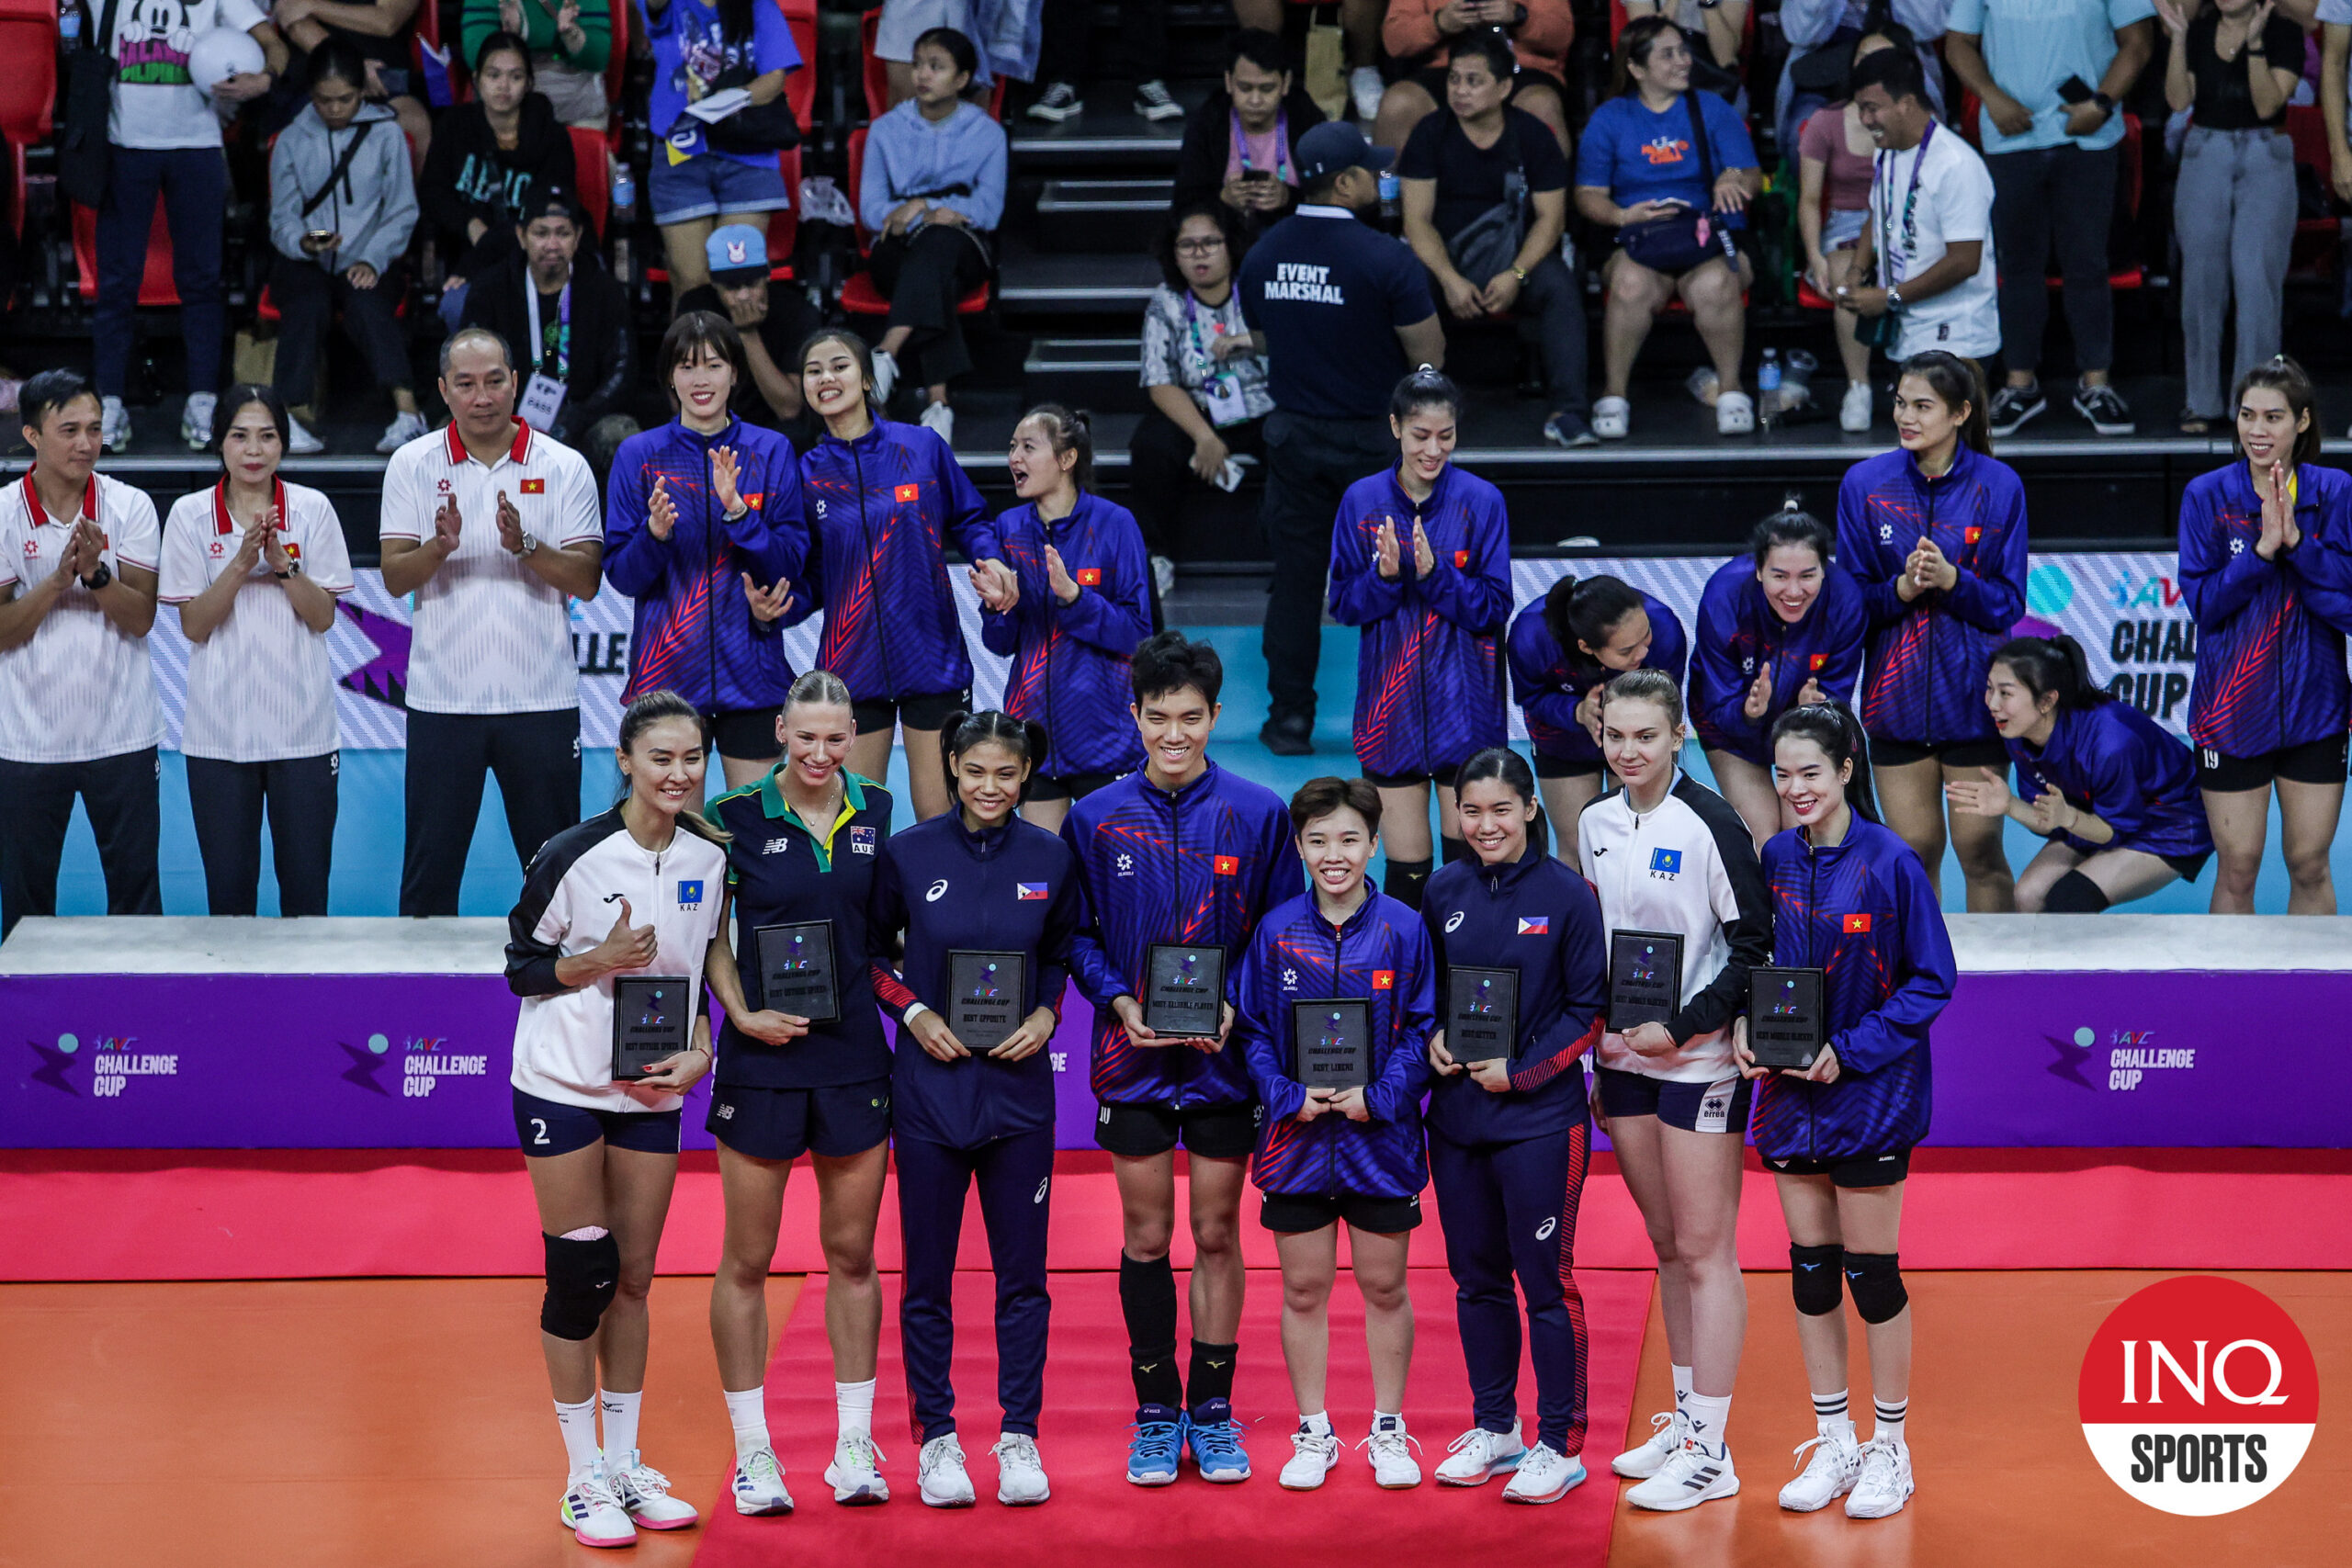 Jia De Guzman and Angel Canino shine for Alas Pilipinas during the AVC Challenge Cup 2024, winning two individual awards